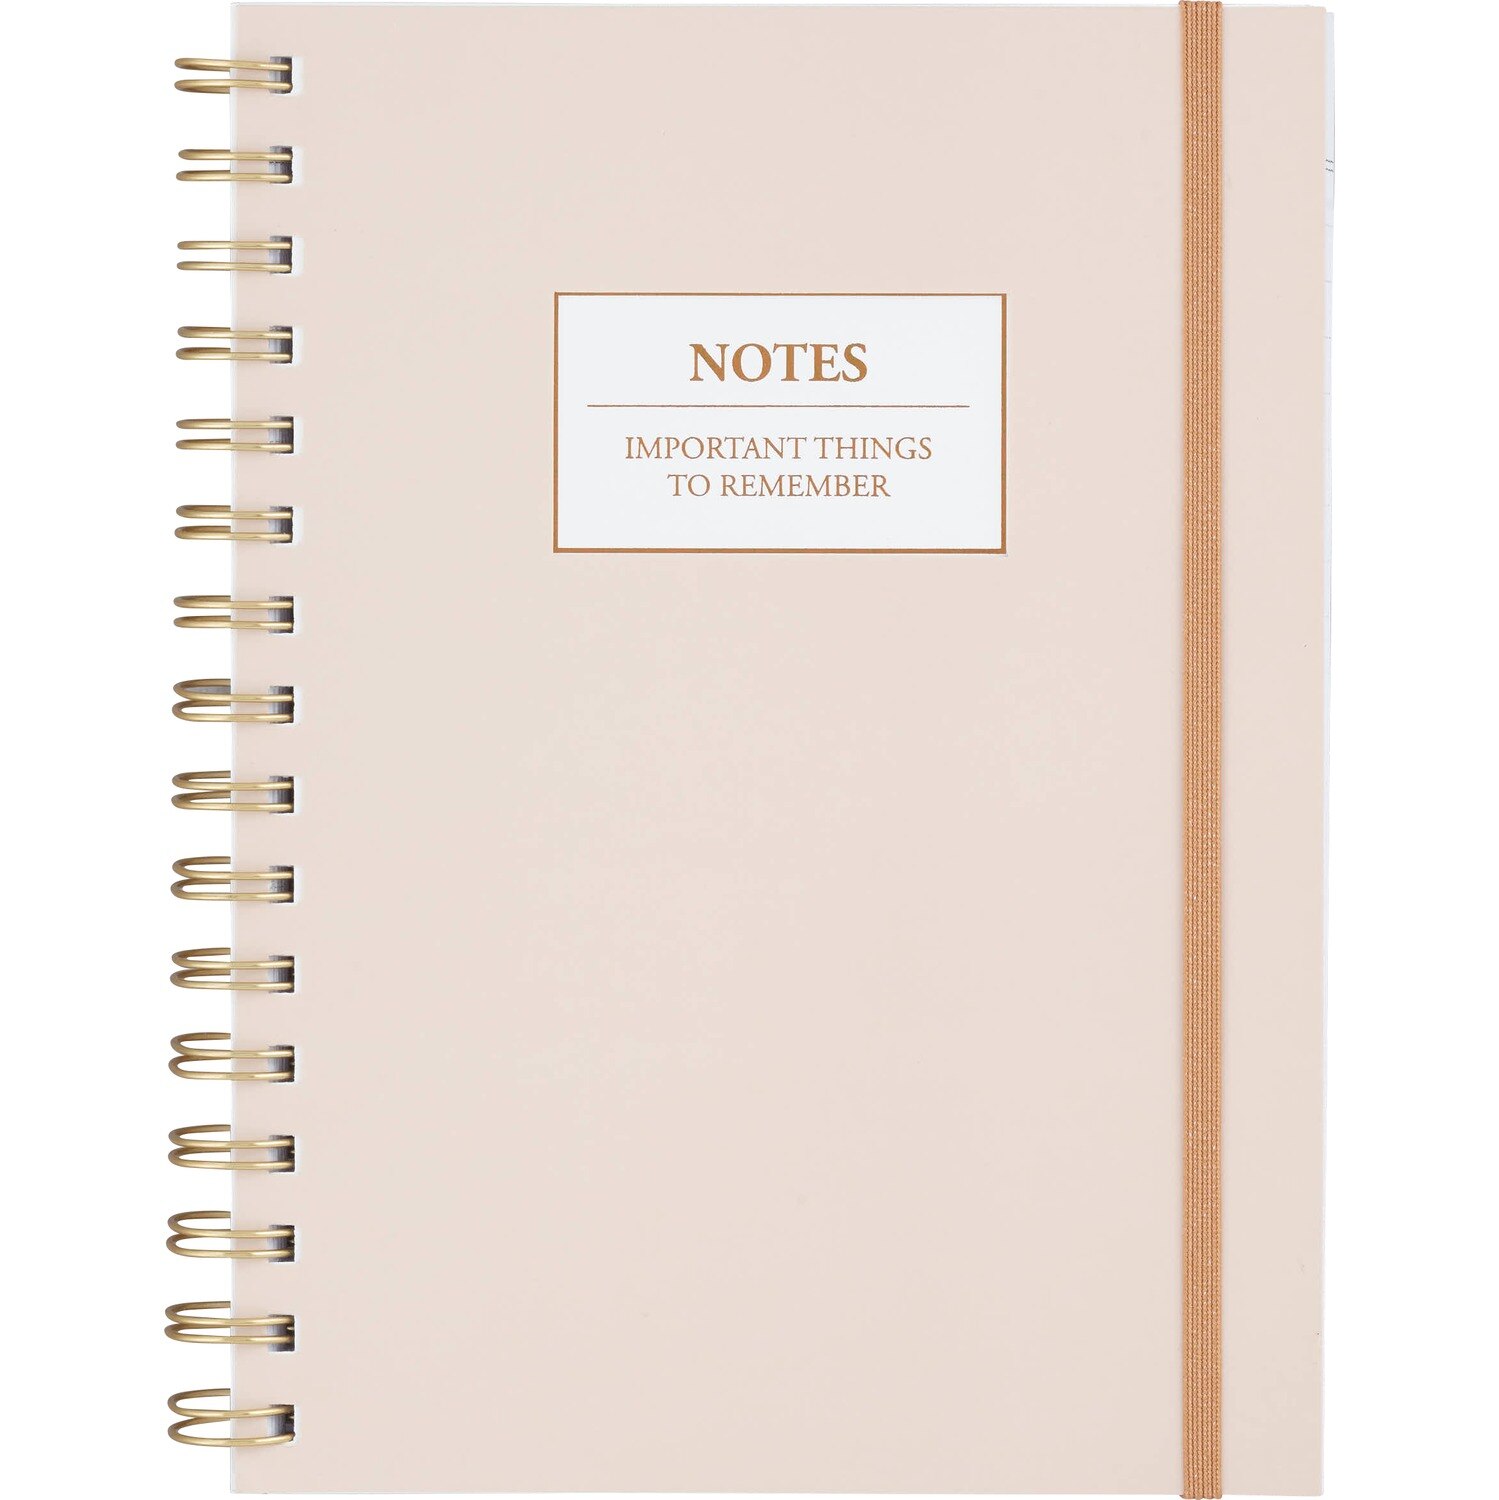 Caliber Fashion Wiro Notebook with Bungee Cord